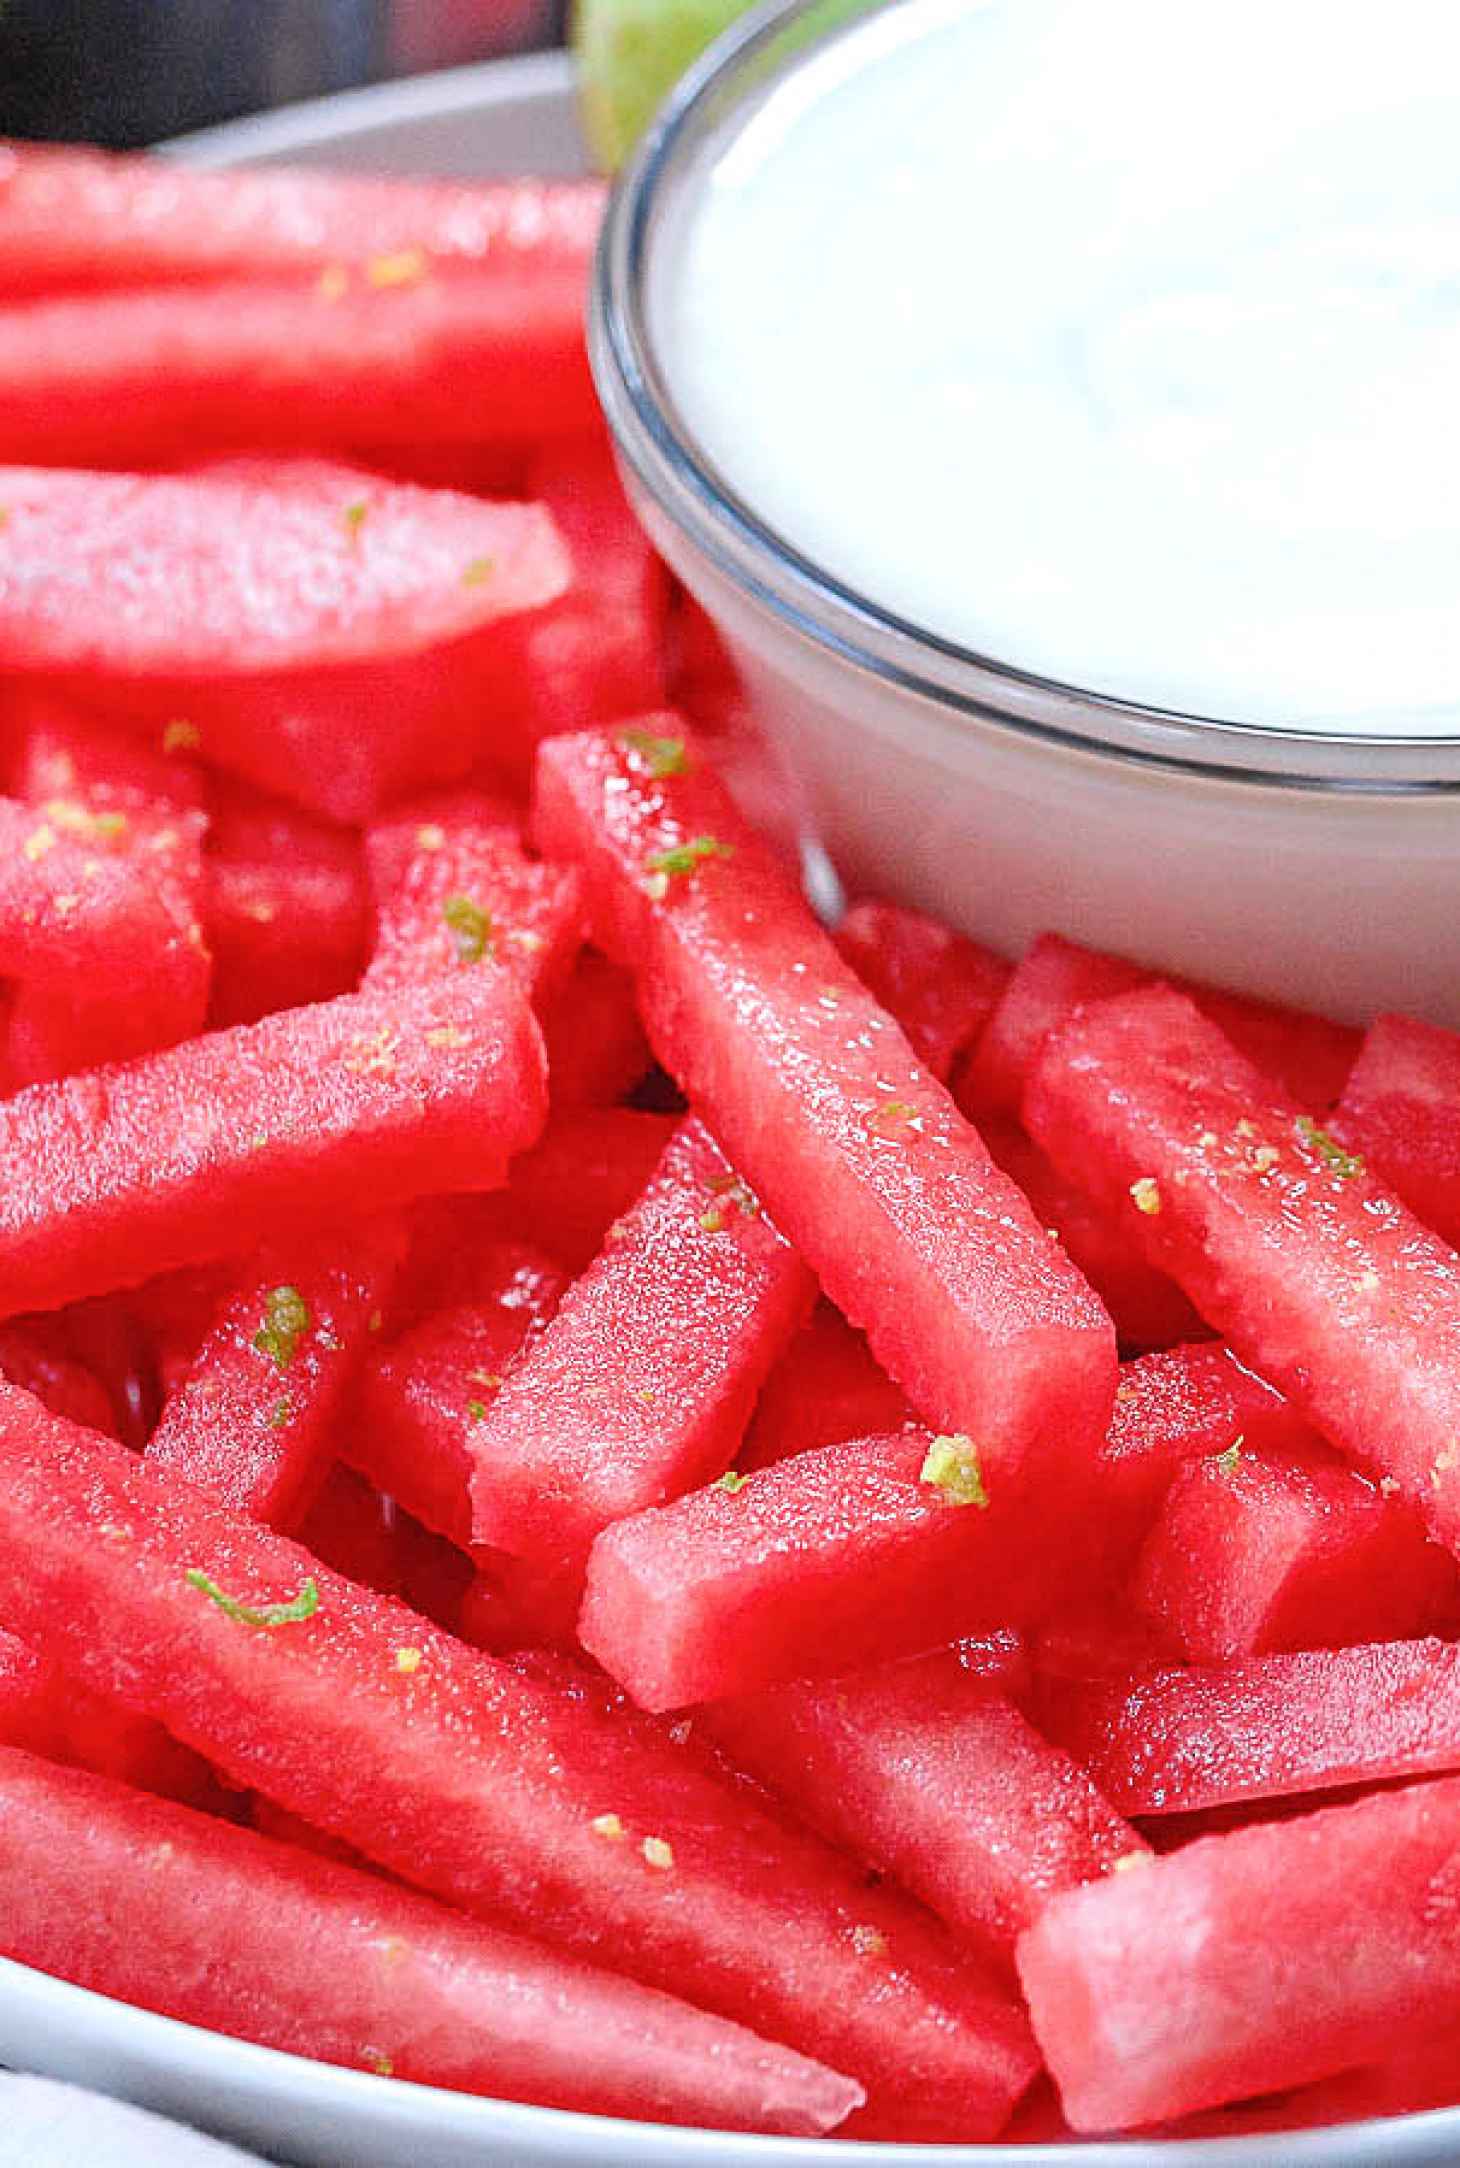 Watermelon Fries with Cream Cheese Marshmallow Dip - #recipe by #eatwell101 - https://www.eatwell101.com/watermelon-fries-recipe-with-cream-cheese-marshmallow-dip